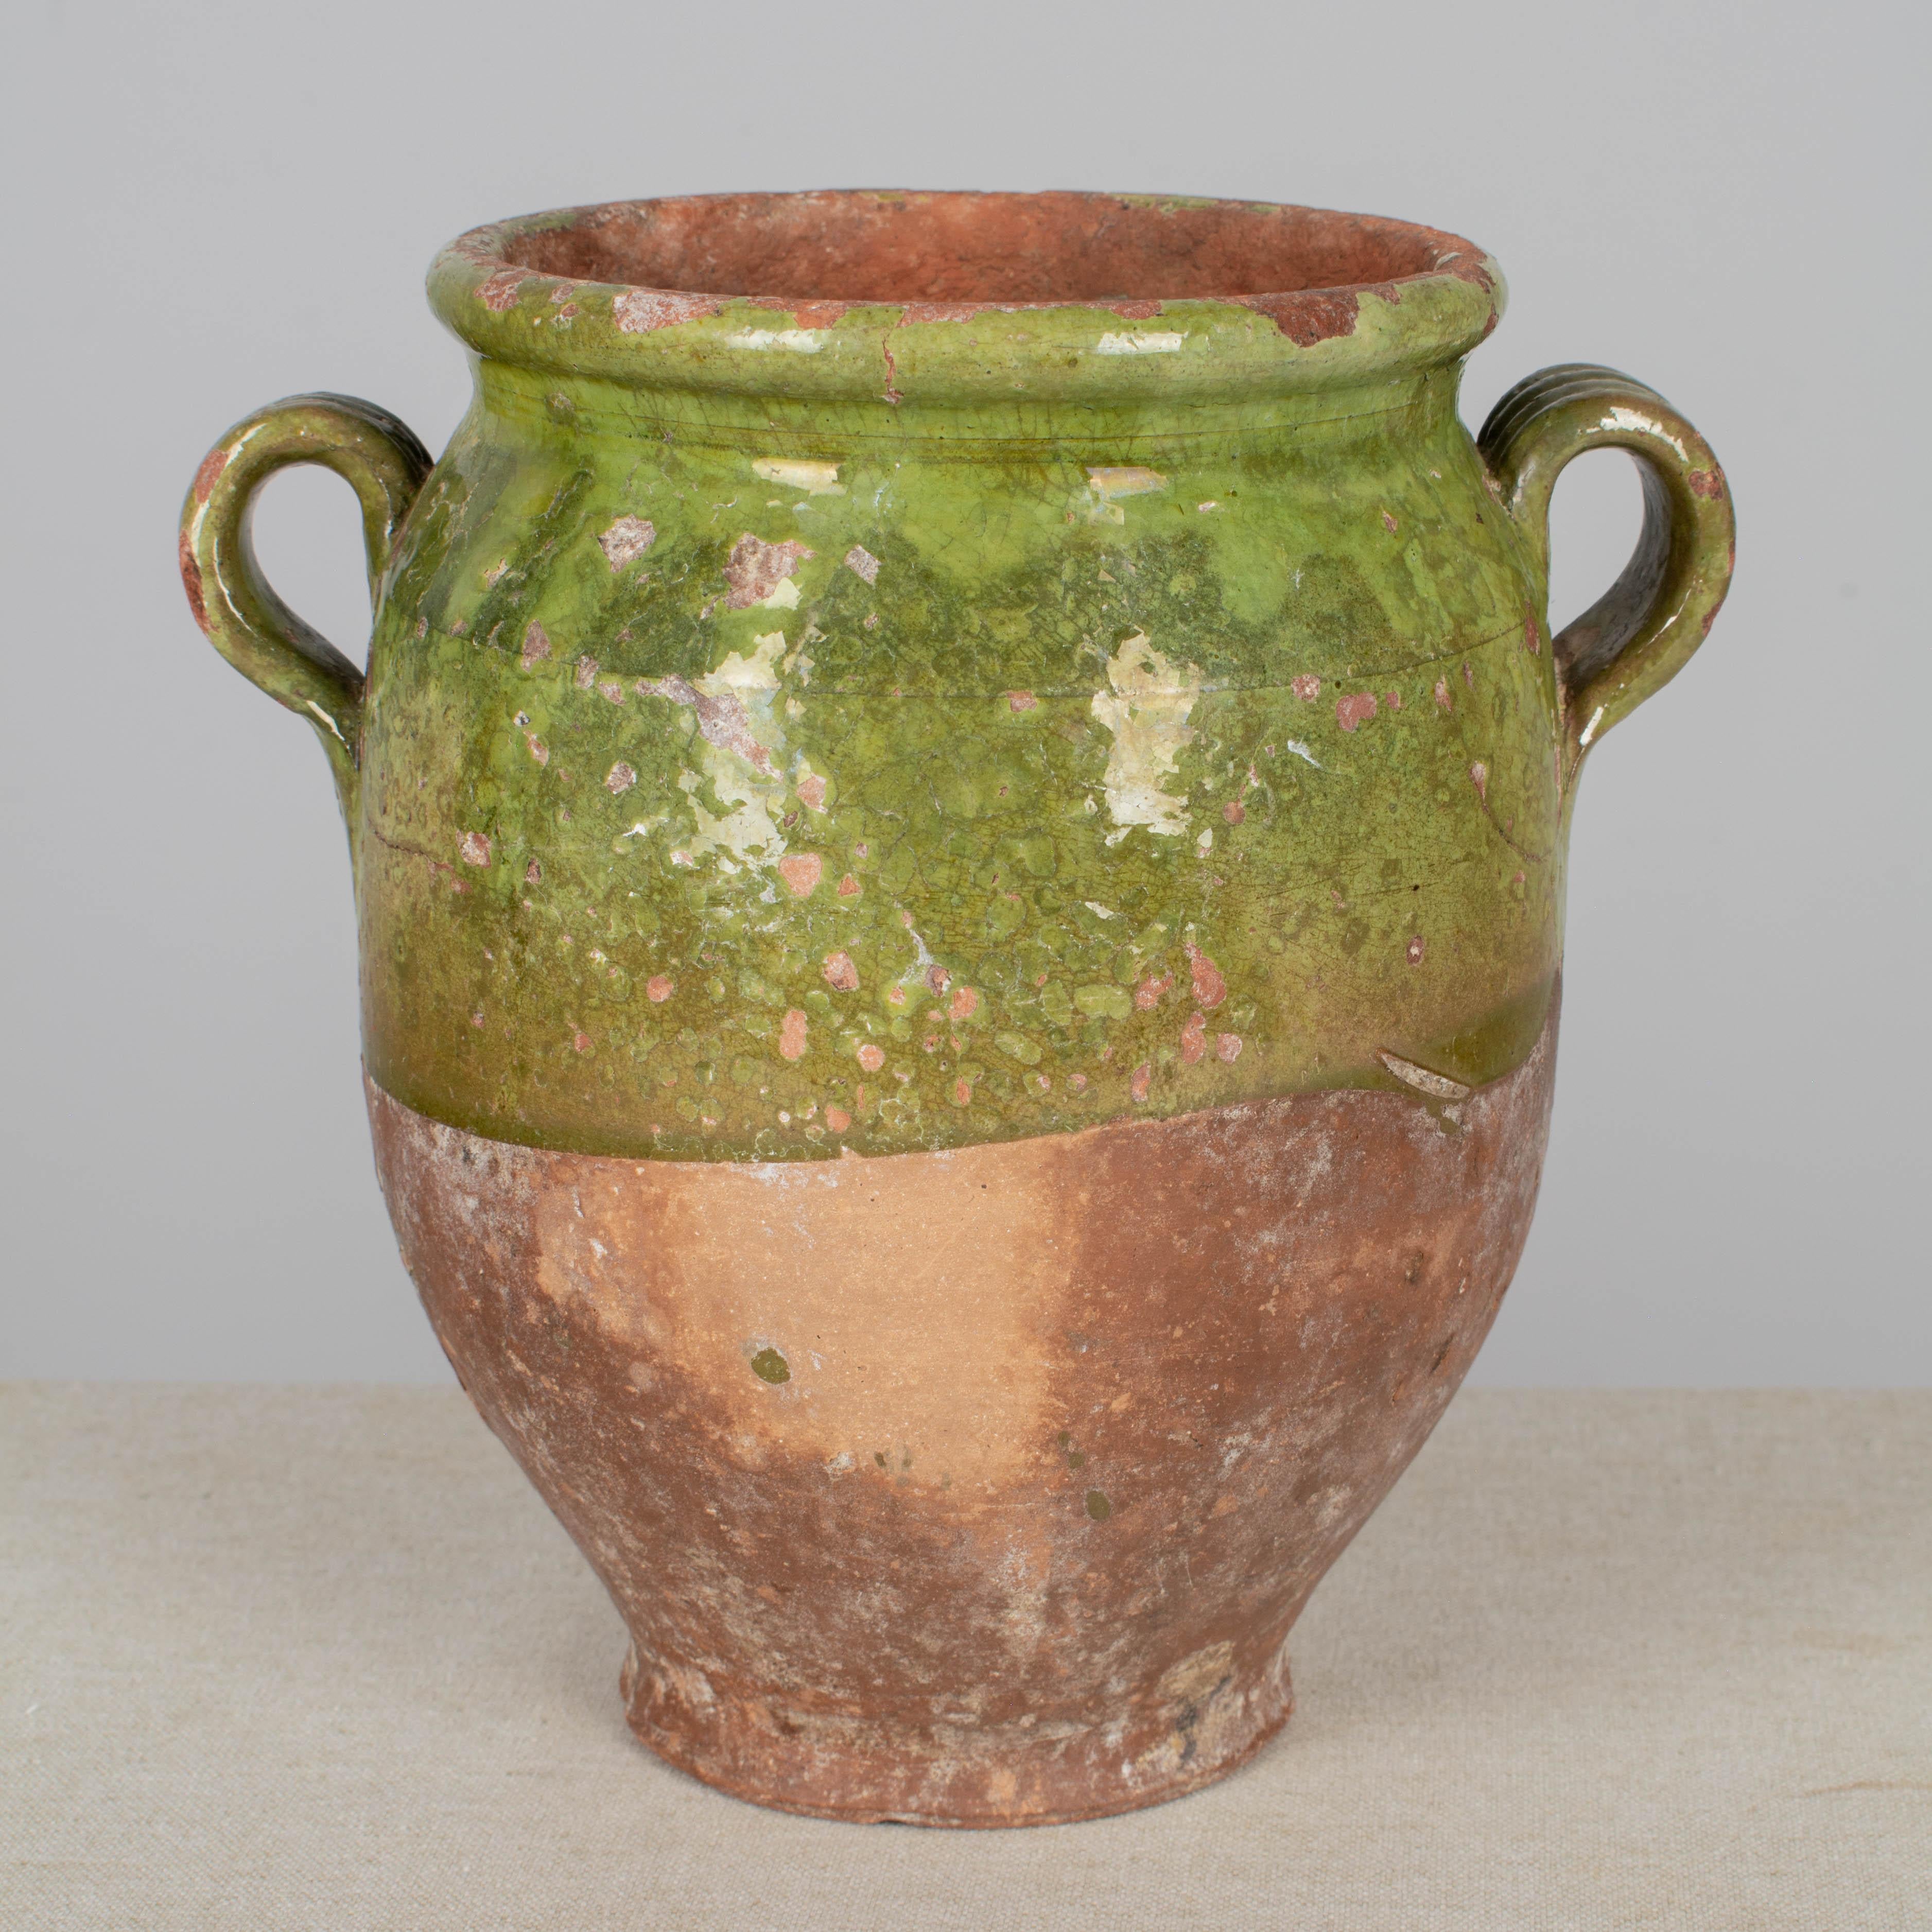 A 19th century French earthenware small confit pot with traditional green glaze. Some chips and losses to glaze. These ordinary earthenware vessels were once used daily in the French country home and have beautiful rustic glazes of yellow, green,